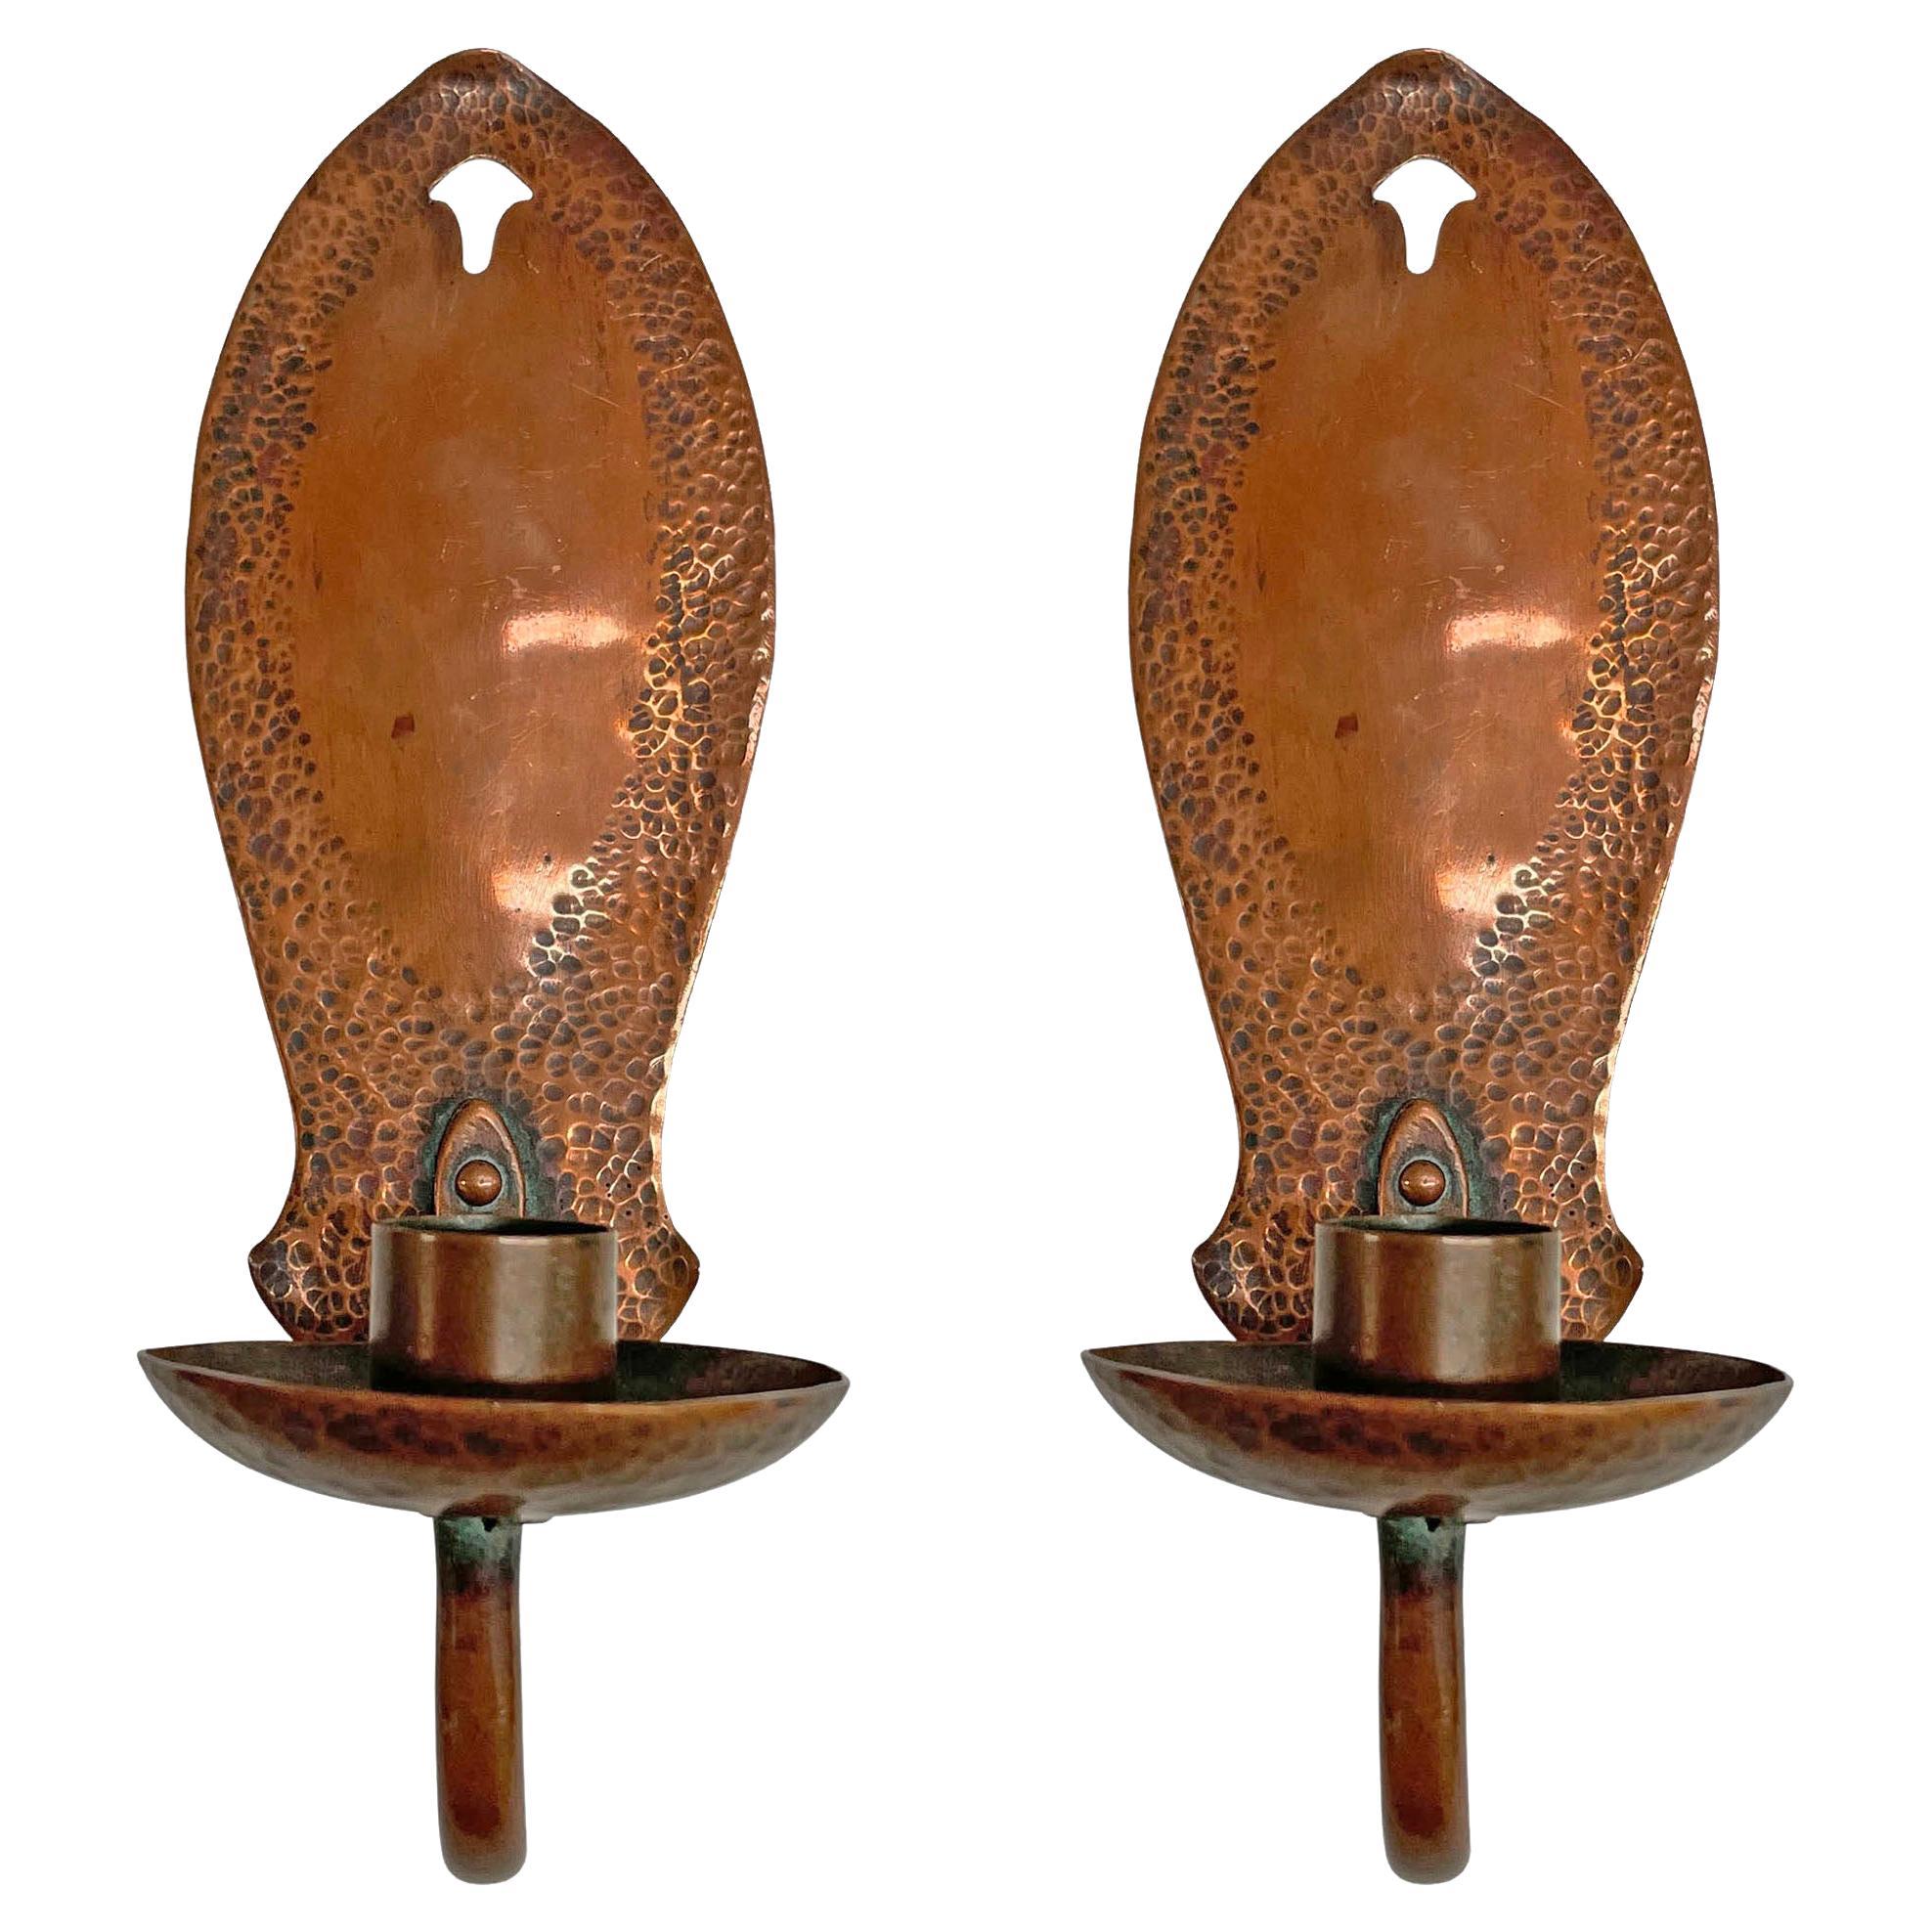 Pair of English Arts & Crafts Hammered Copper Candle Sconces